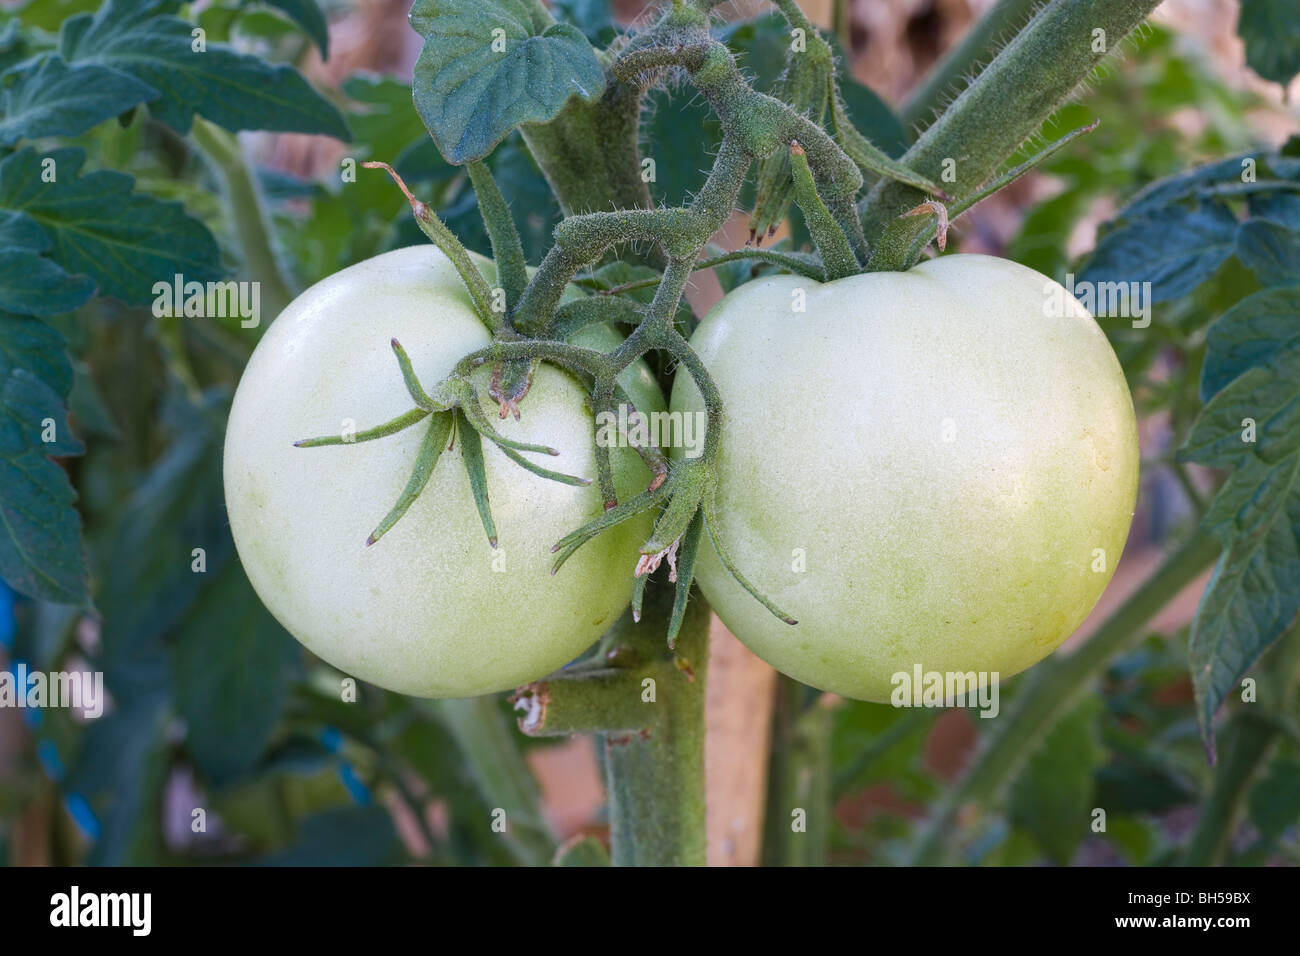 ripening green tomatoes with spent flowers ready to develop new fruit. Stock Photo